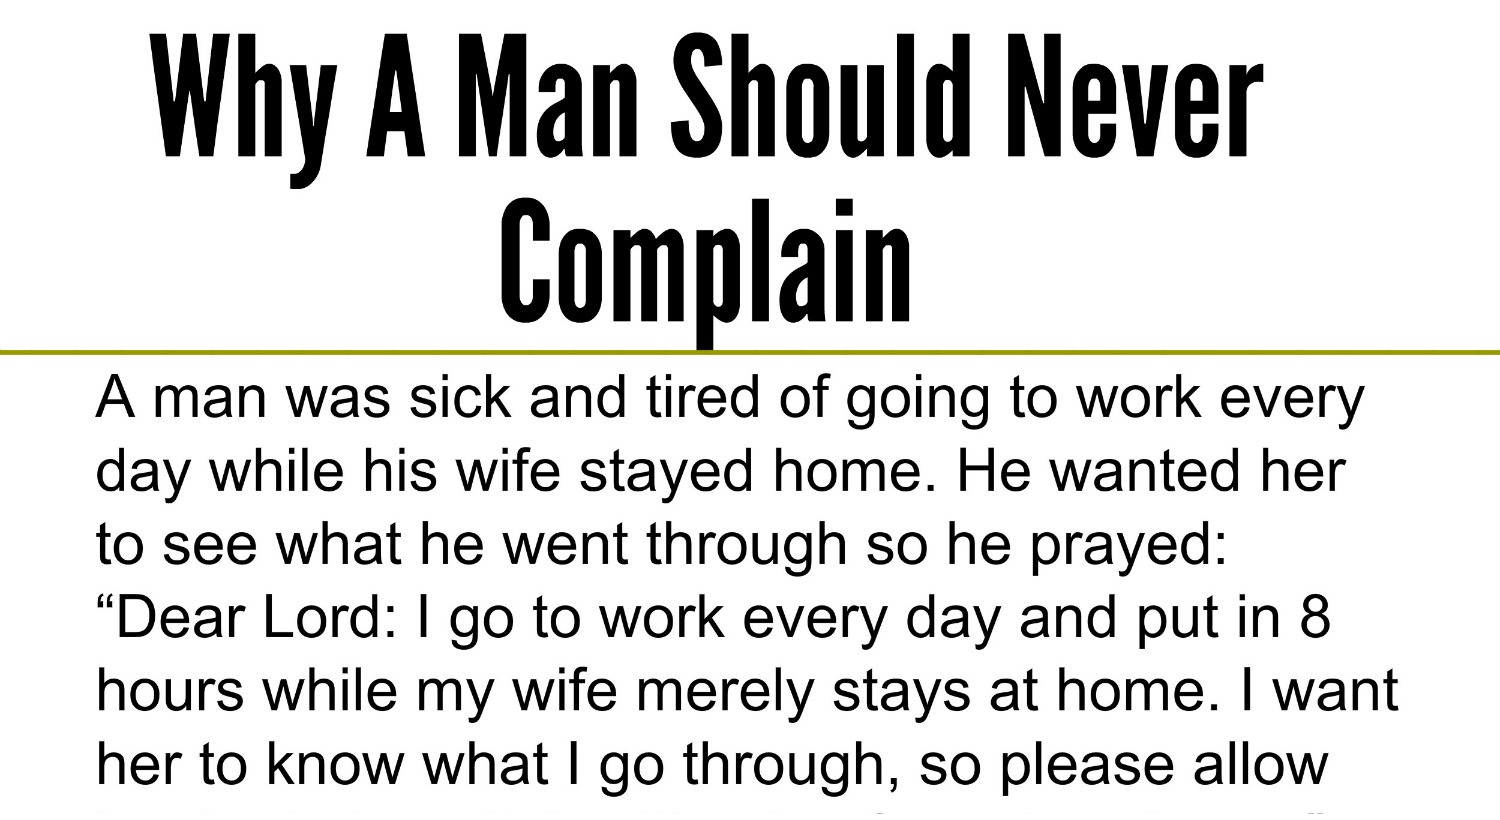 A man was sick and tired of going to work every day while his wife stayed home He wanted her to see what he went through so he prayed